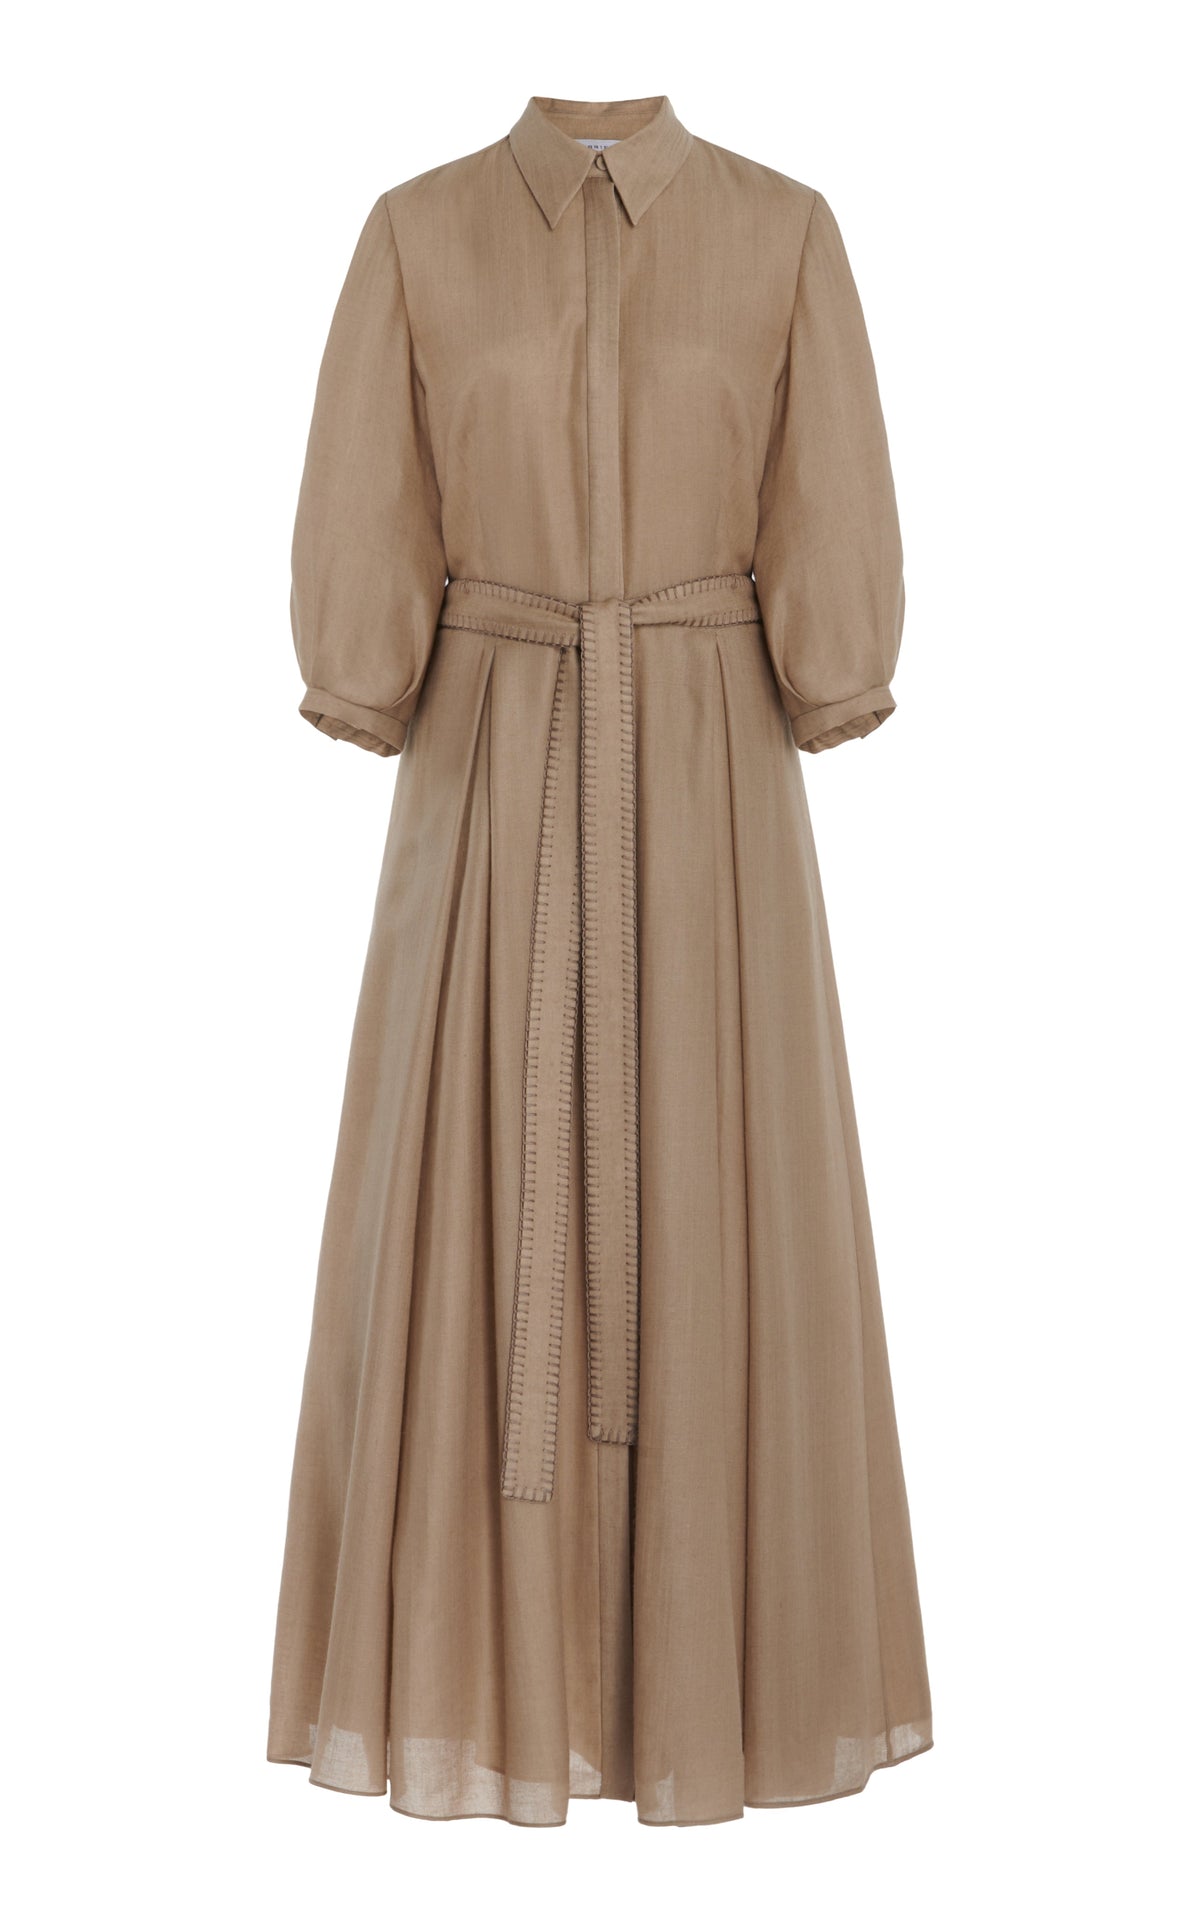 Andy Pleated Dress in Khaki Virgin Wool Cashmere